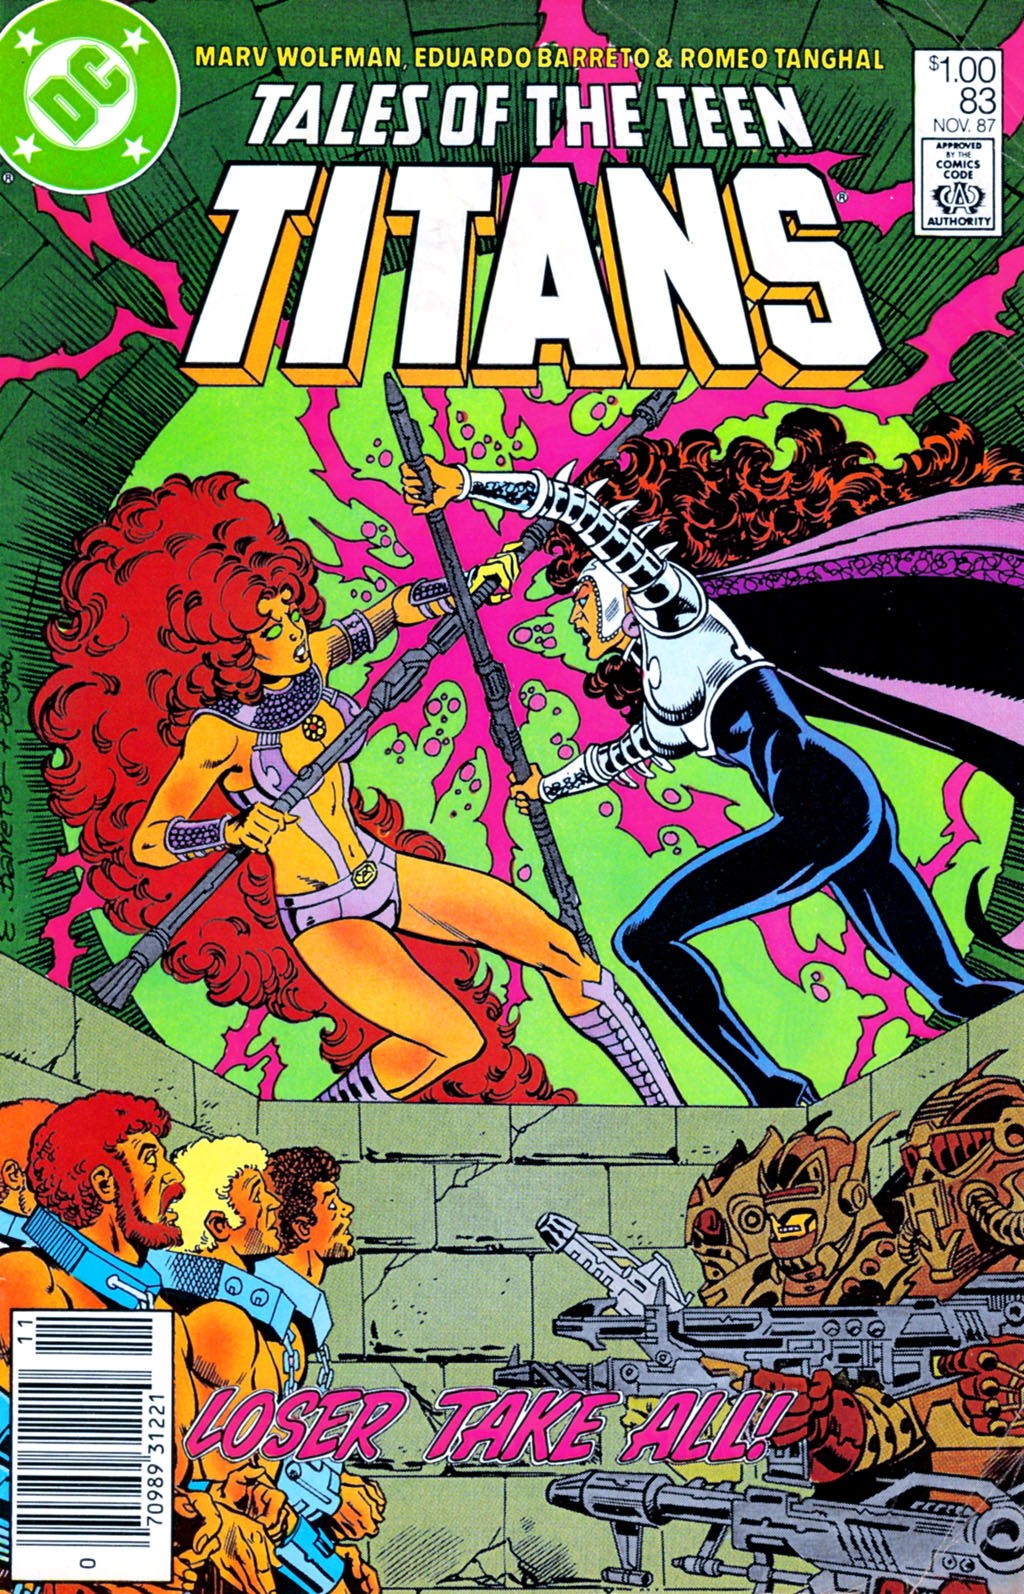 Read online Tales of the Teen Titans comic -  Issue #83 - 1